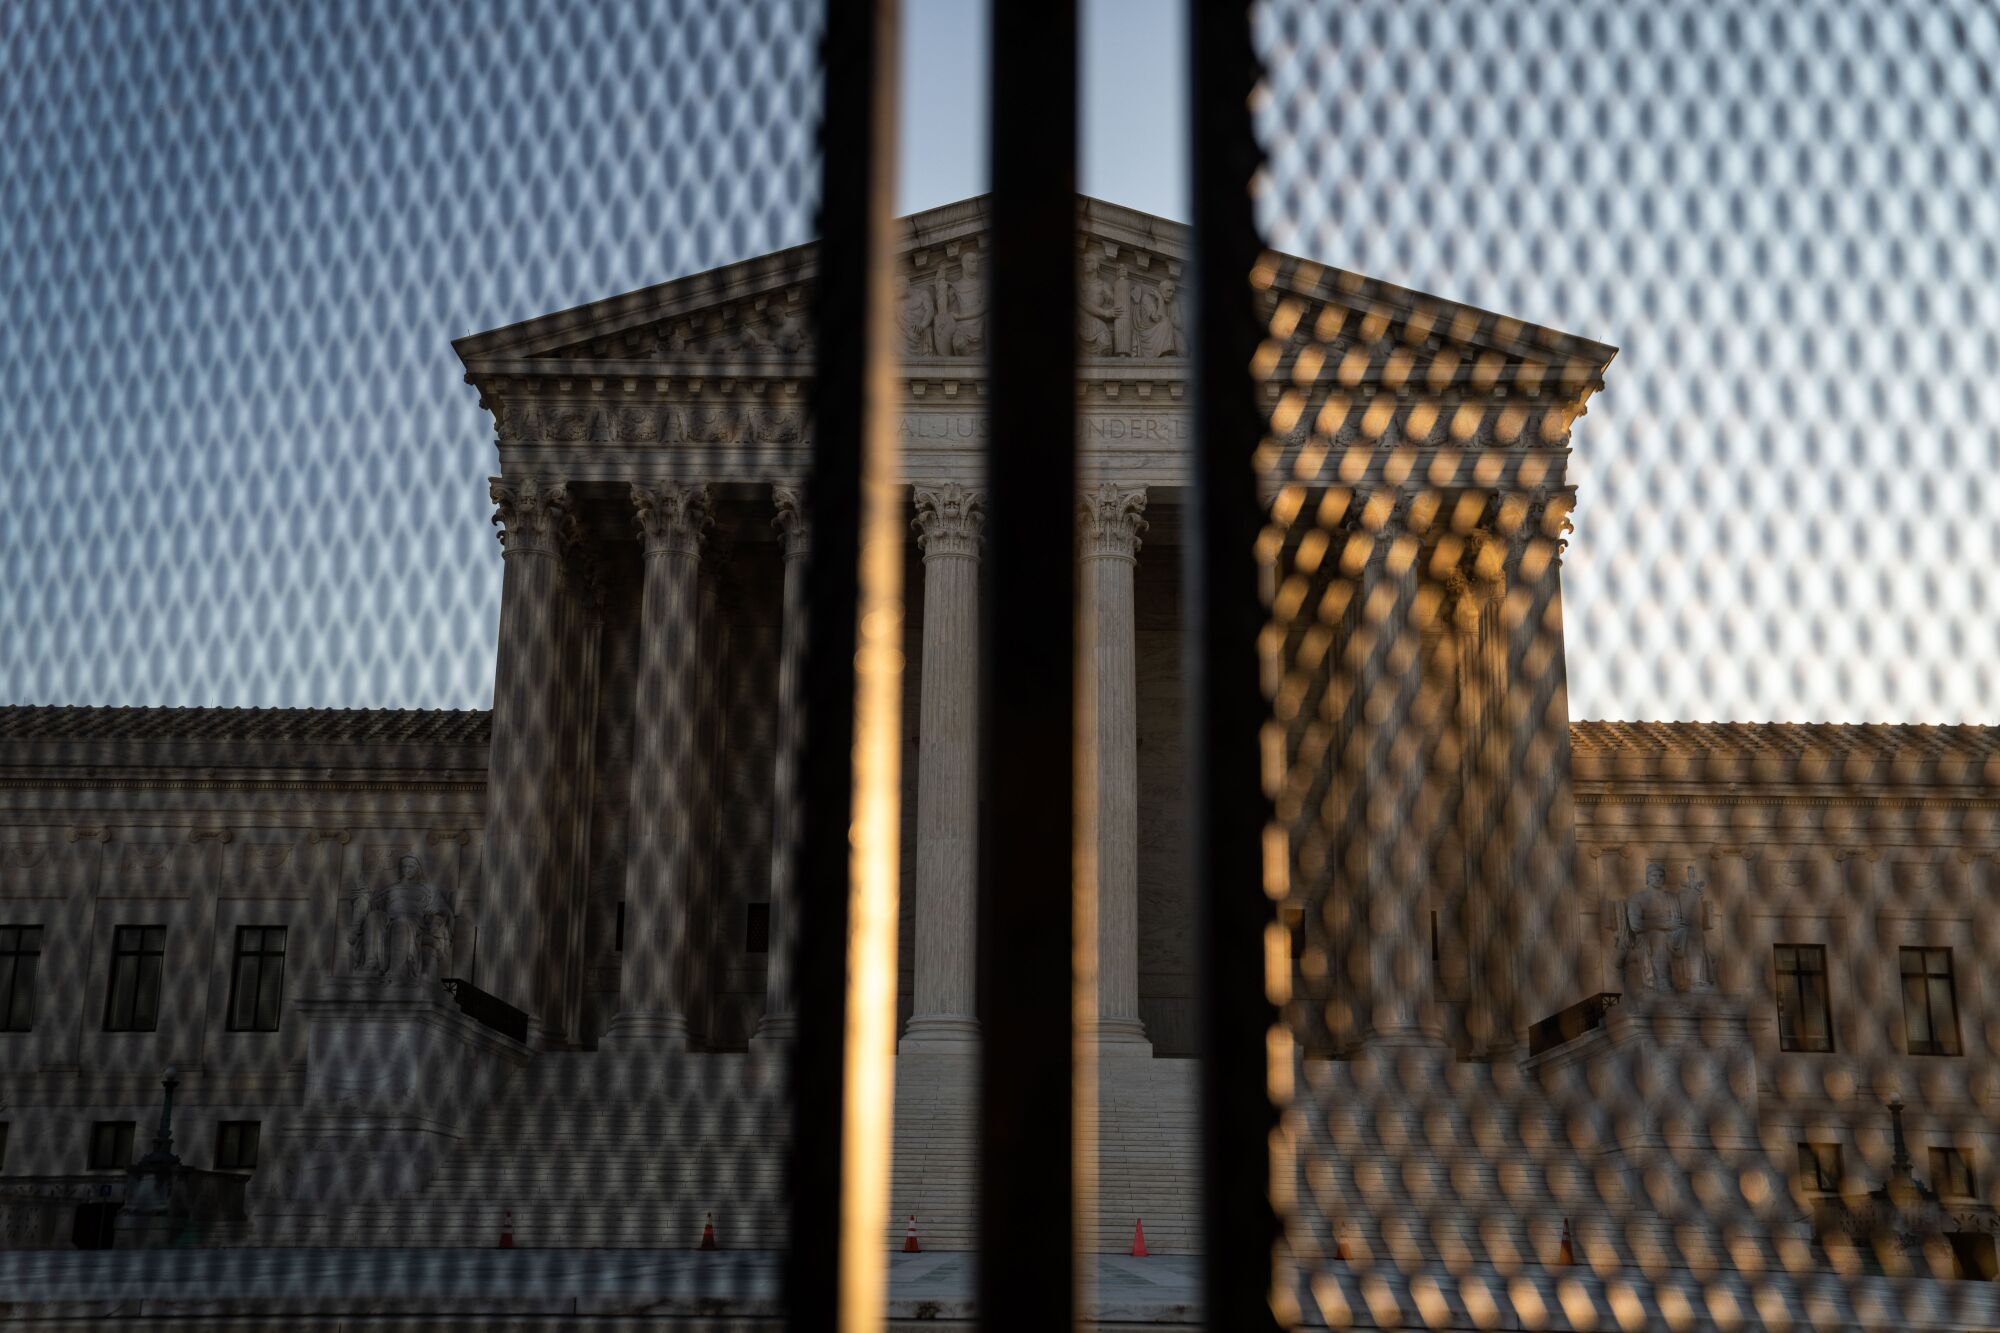 The Supreme Court, behind security fencing, on Saturday in Washington.